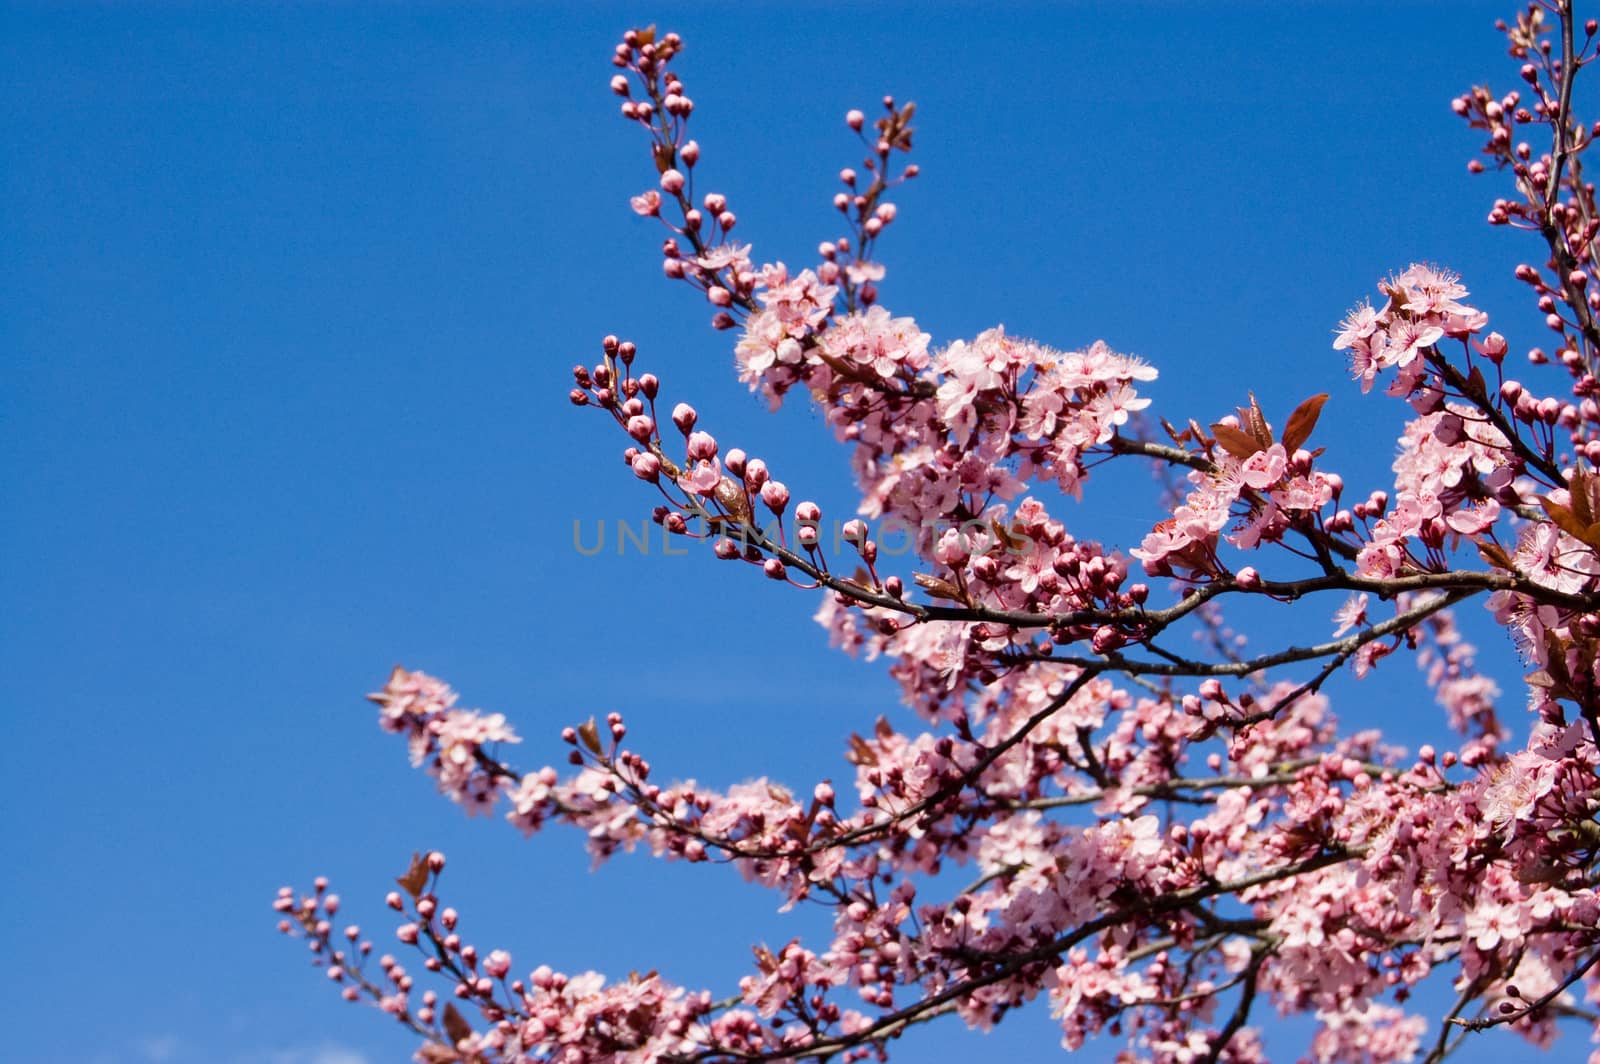 Branches of a flowering cherry tree Prunus serrulata bursting with pink blooms in the Spring sunshine.